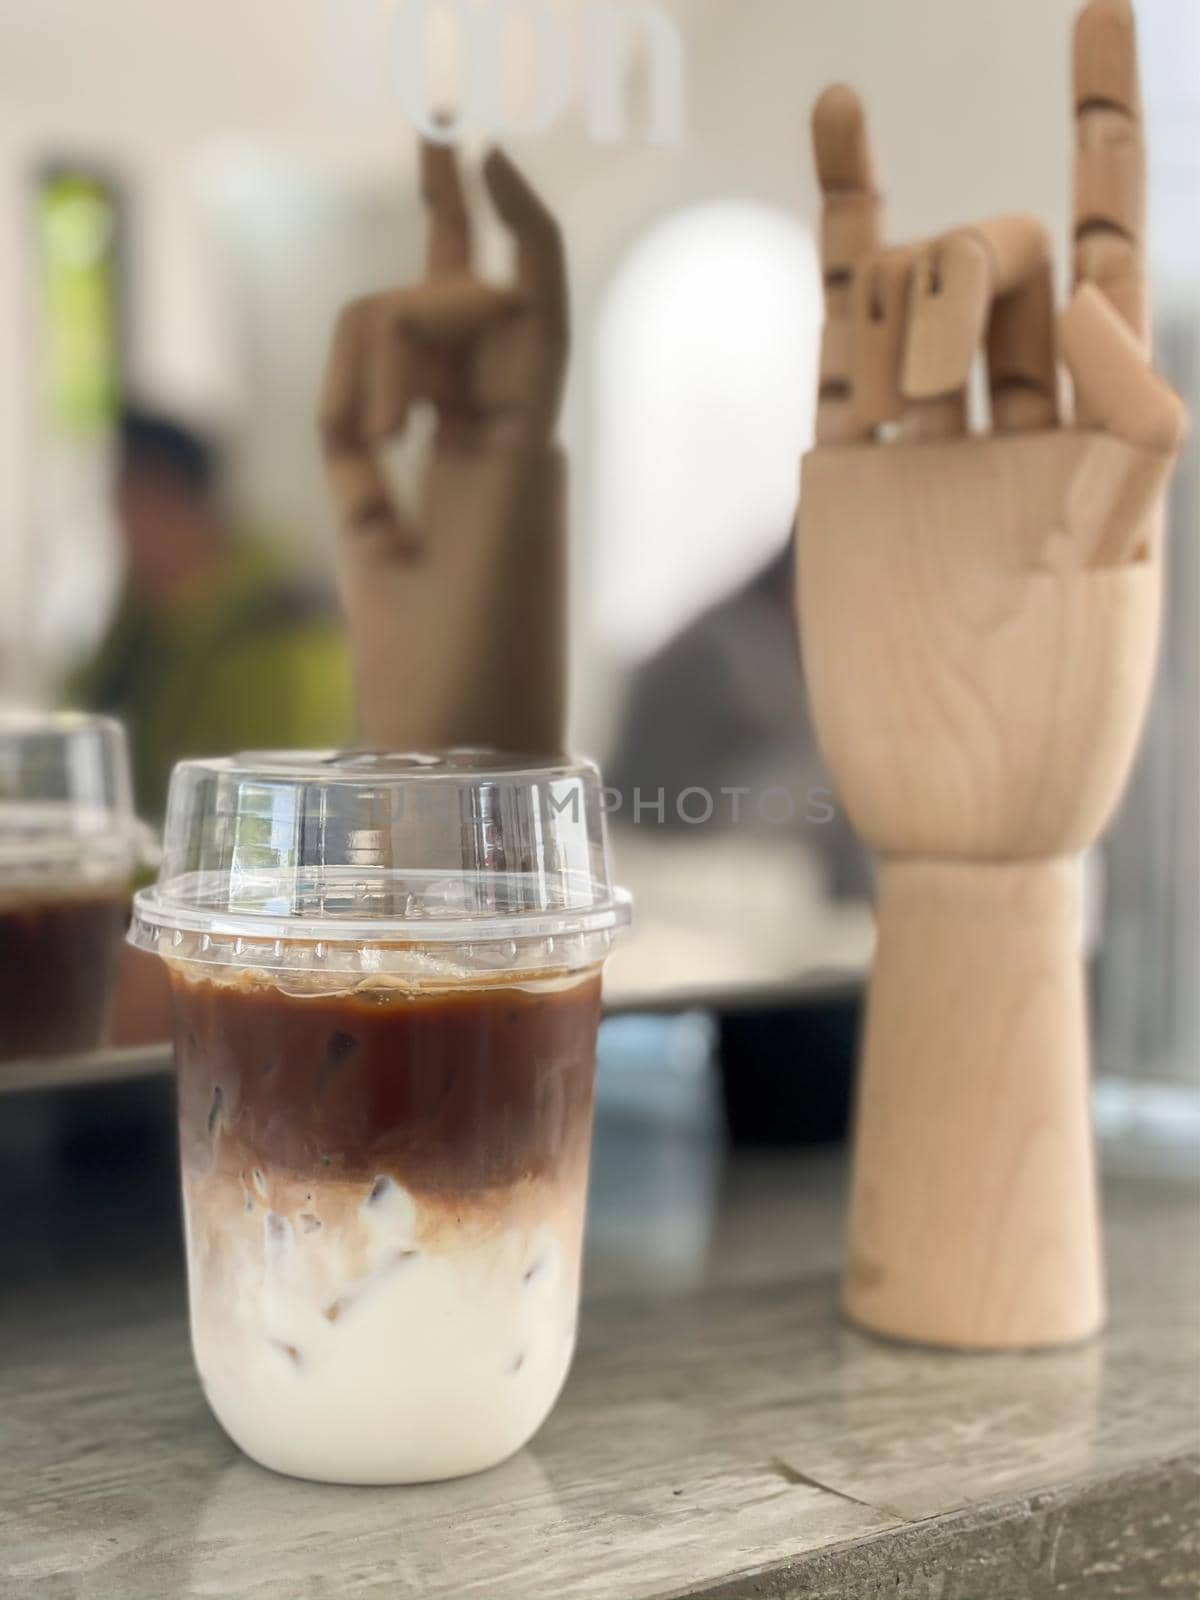 A glass of iced latte coffee, stock photo